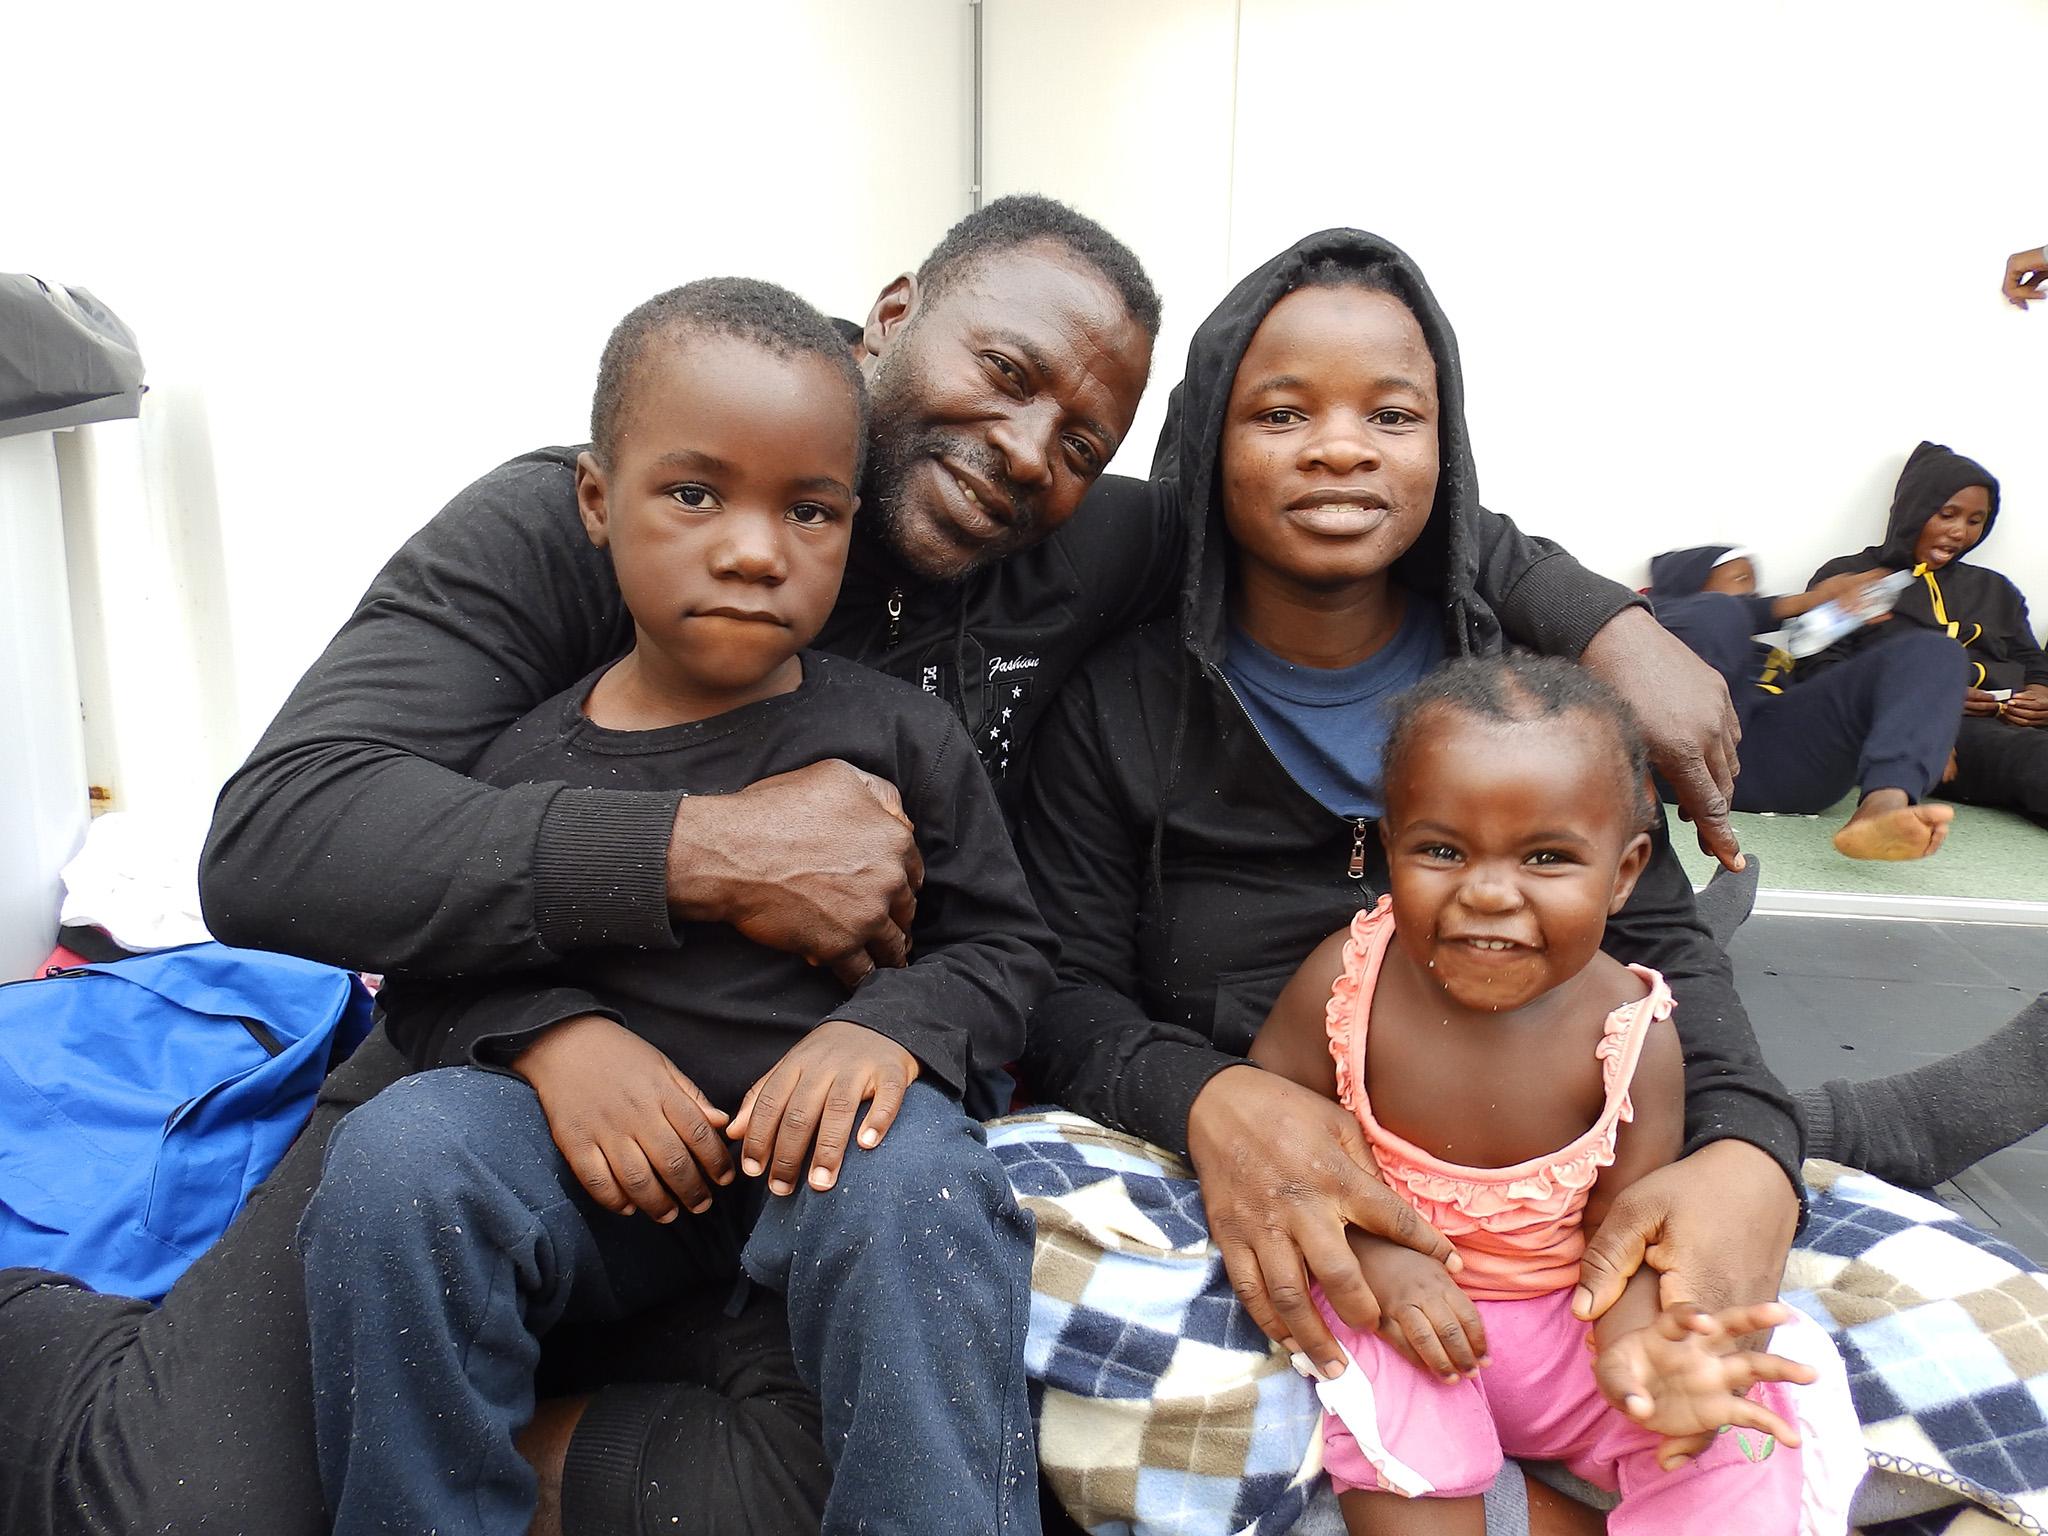 Suleiman Boussy, his wife Fatima and their two children have fled Burkina Faso